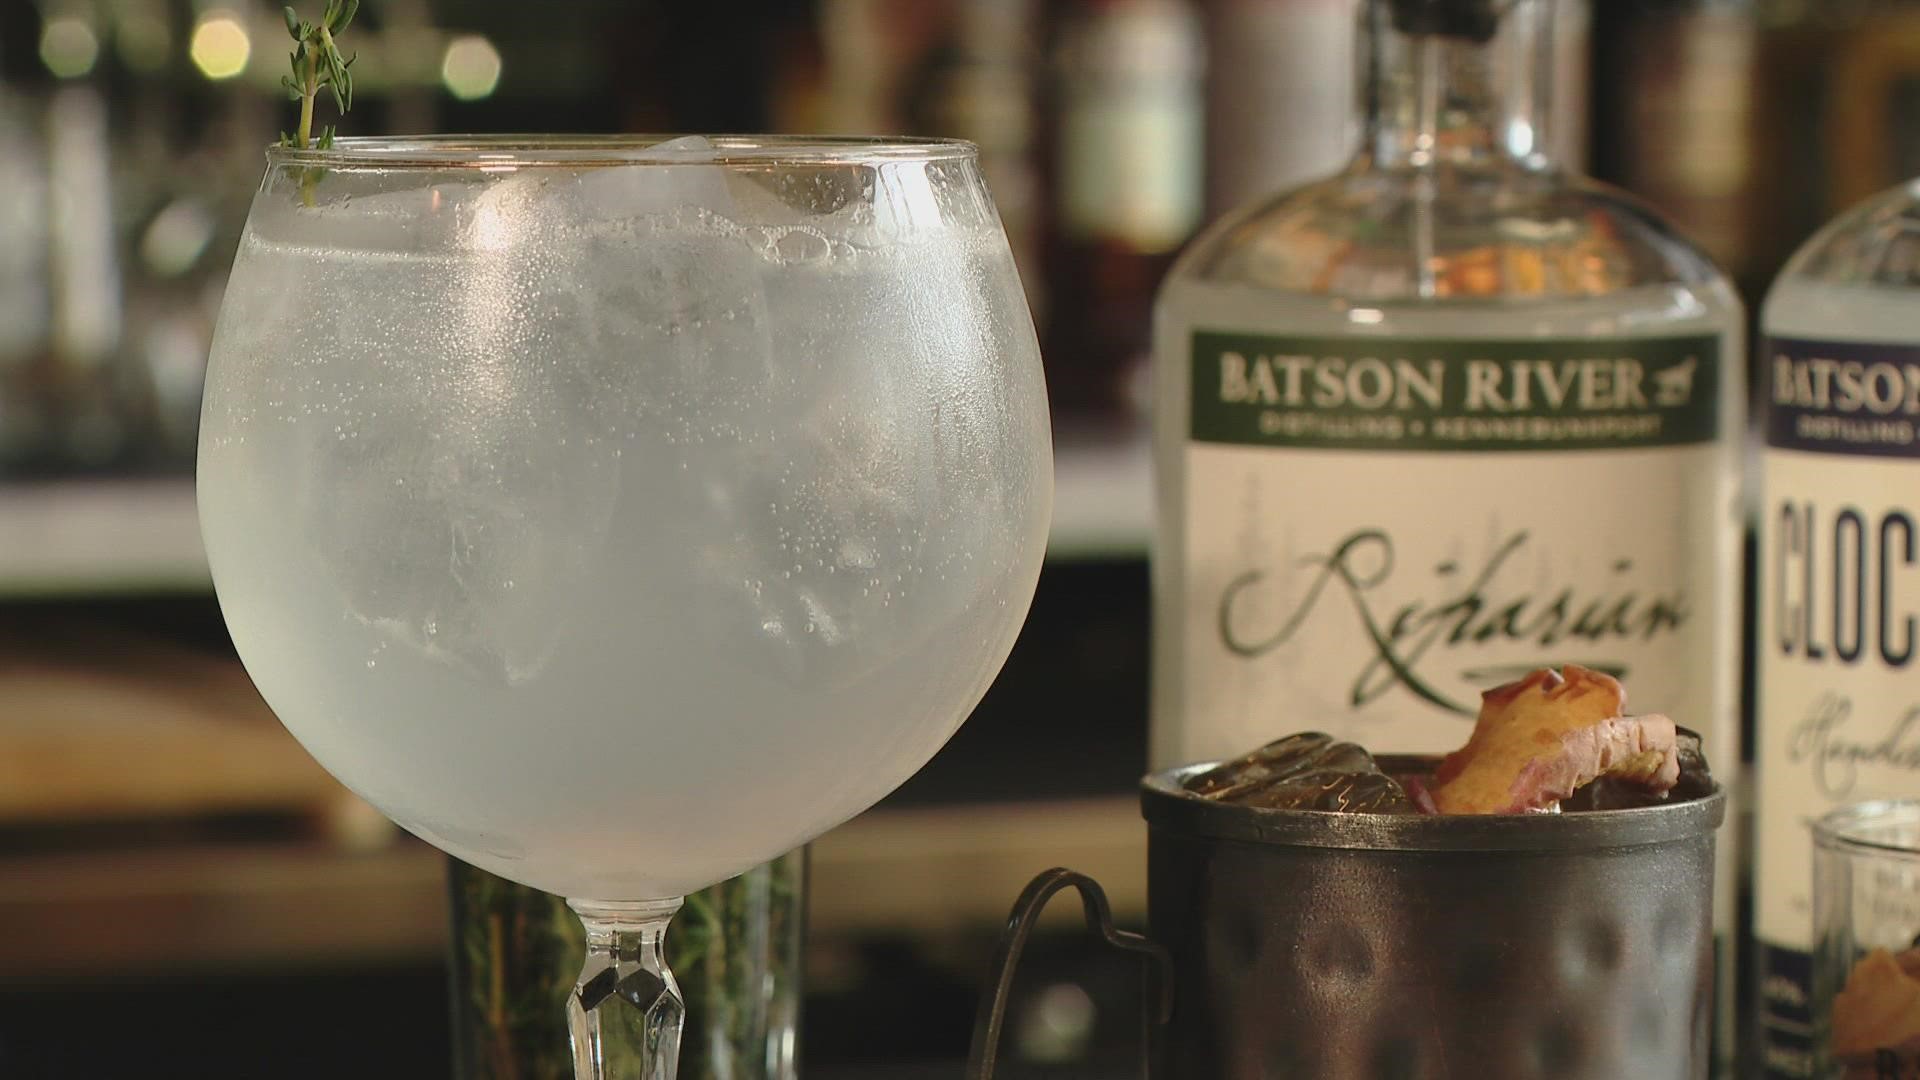 Bar Manager Ali Koppel shows us how to prepare two of their featured cocktails.